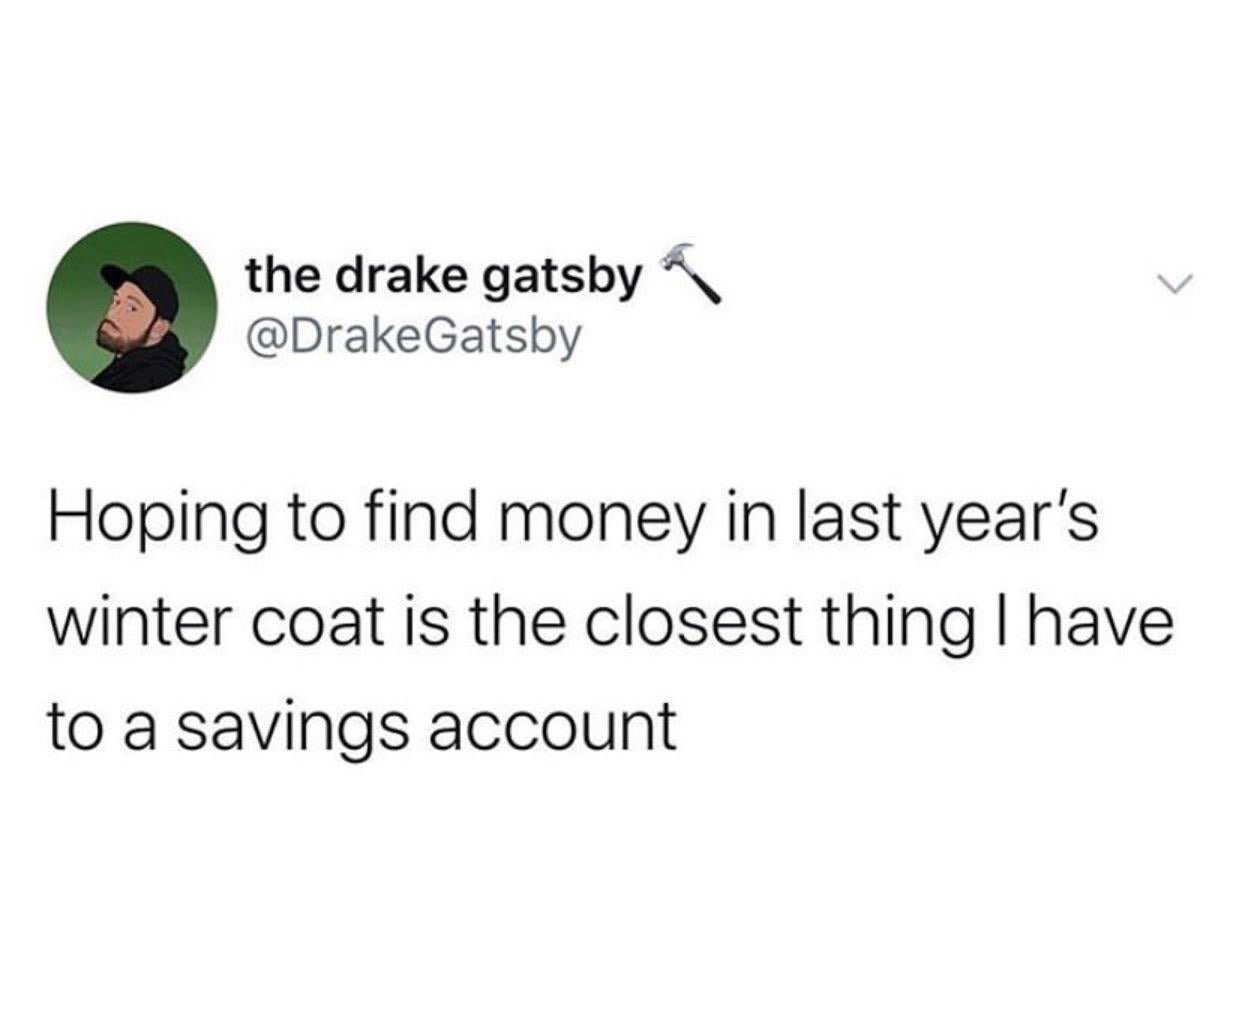 john mayer shout out to people - the drake gatsby Hoping to find money in last year's winter coat is the closest thing I have to a savings account